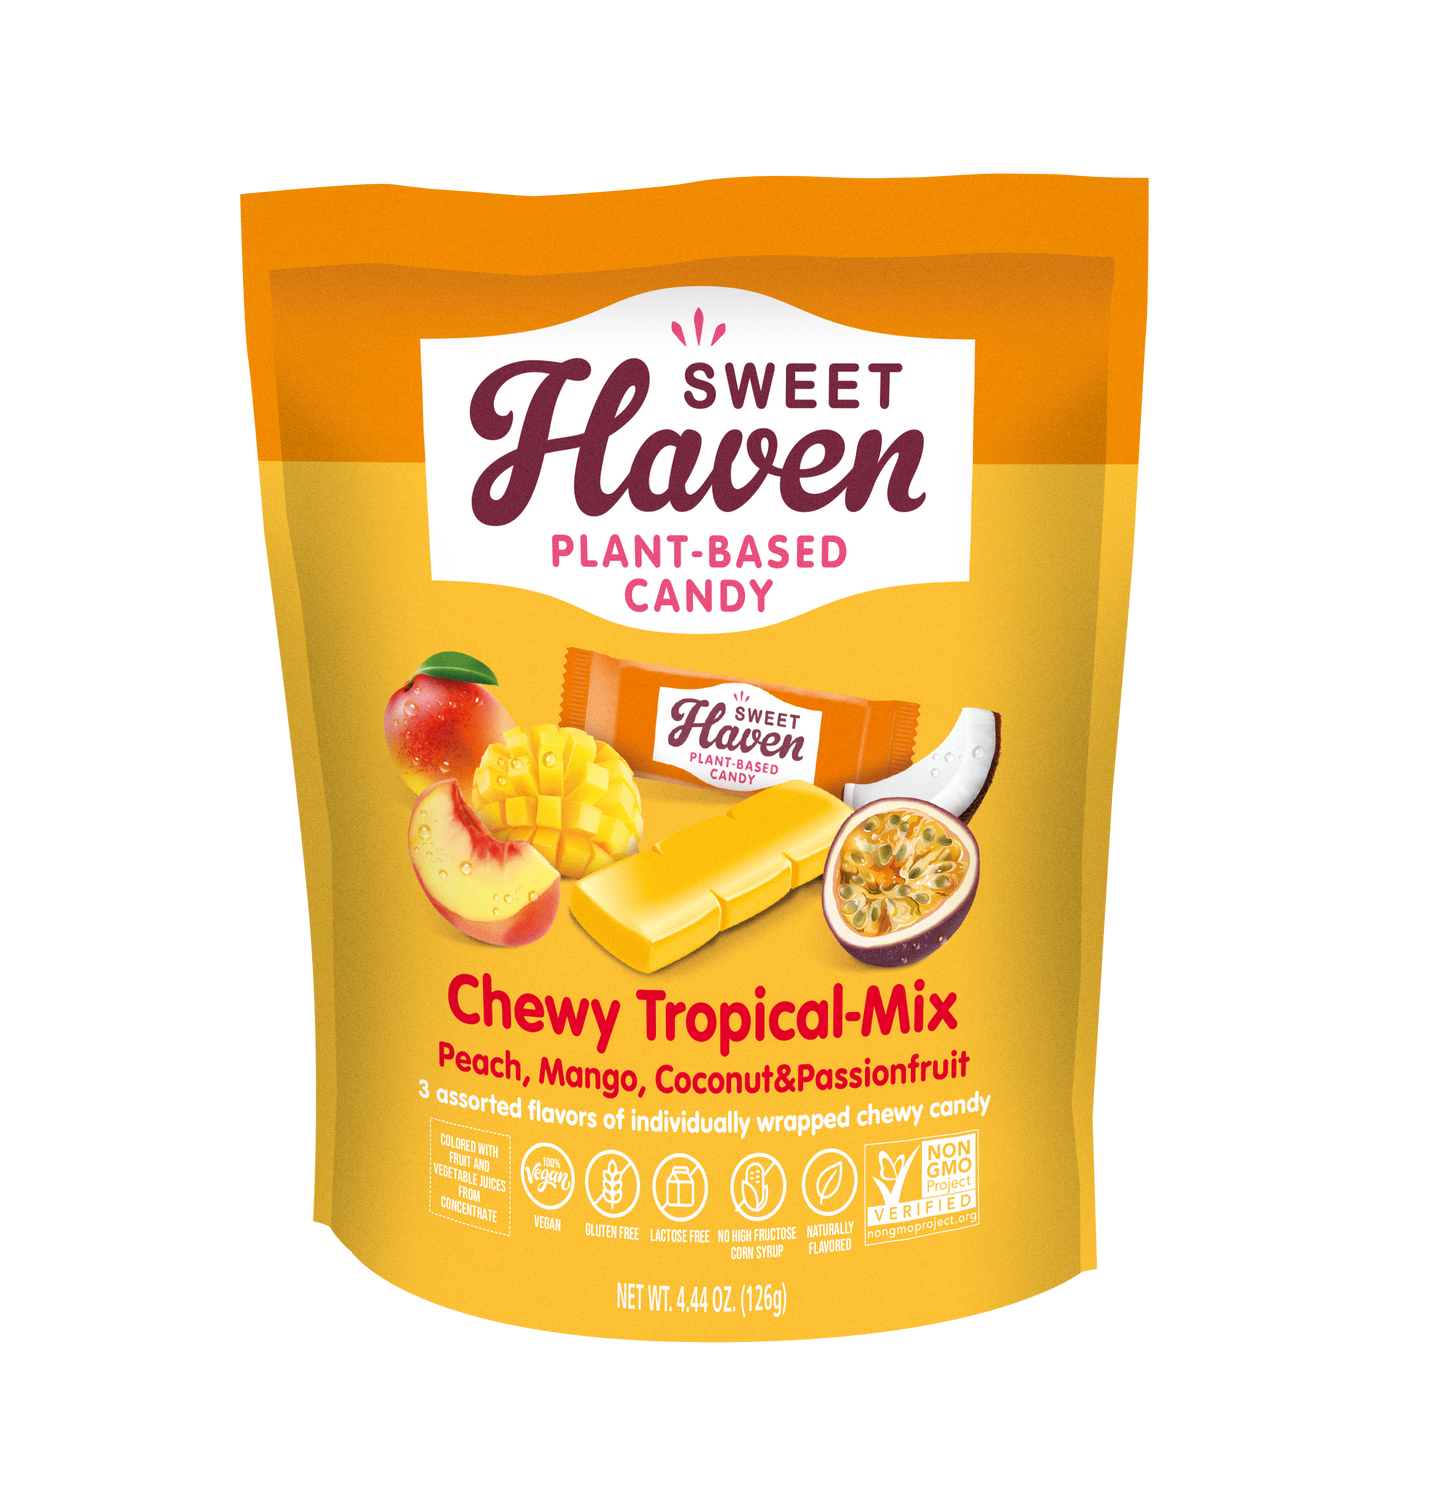 Chewy Tropical-Mix